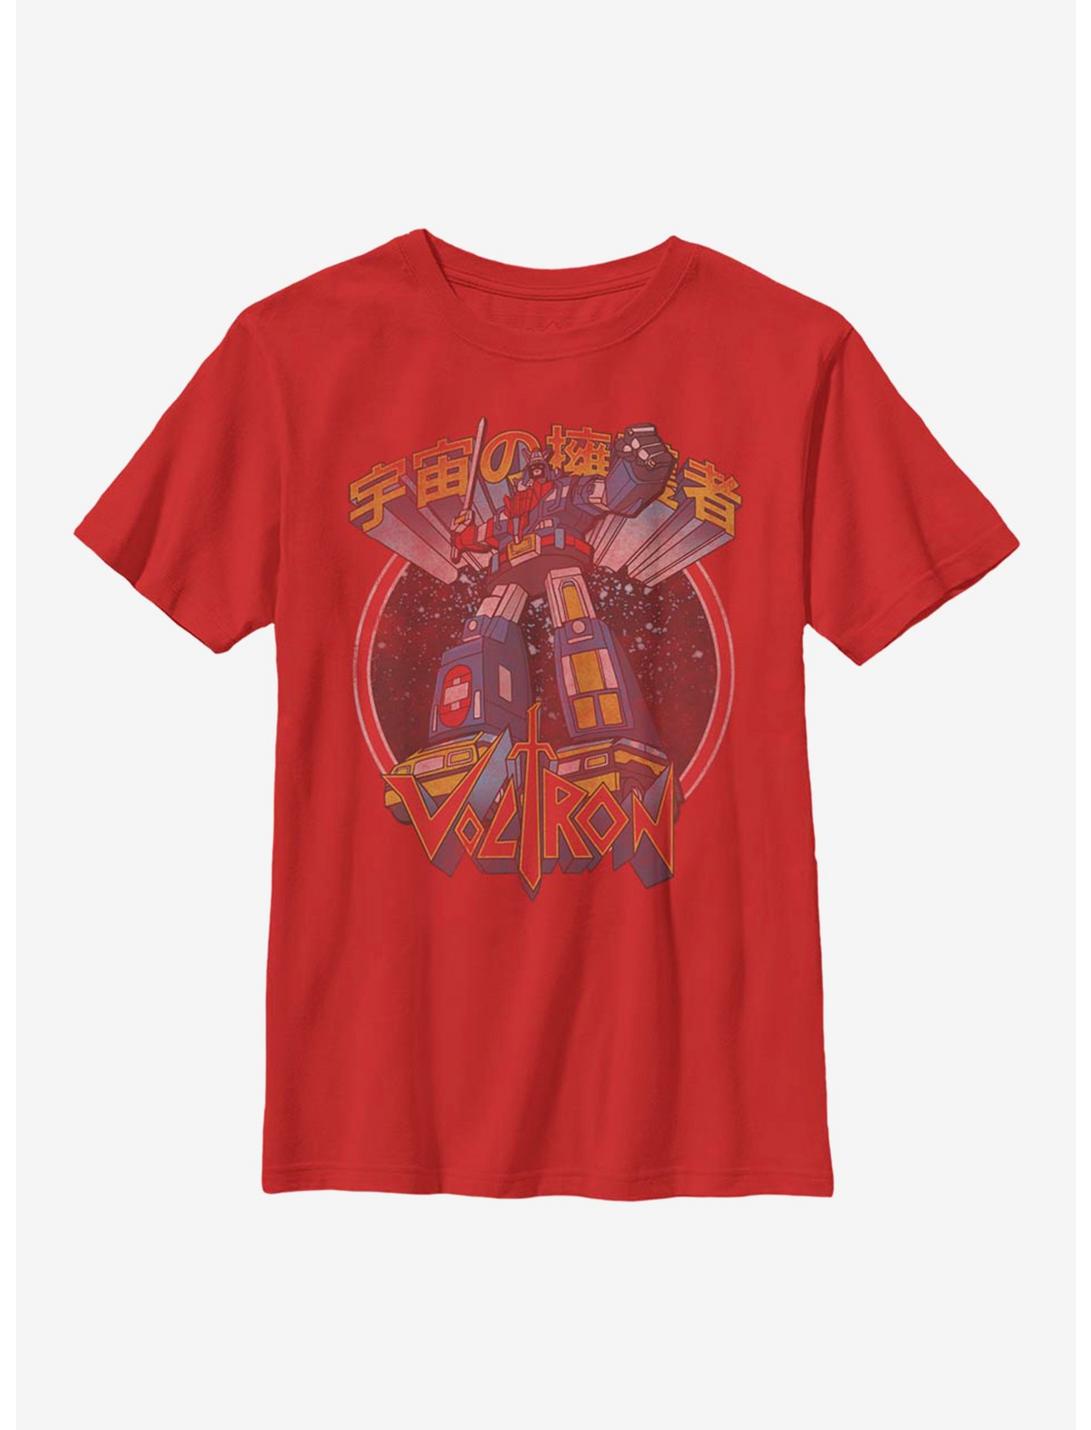 Voltron Japanese Text Youth T-Shirt, RED, hi-res